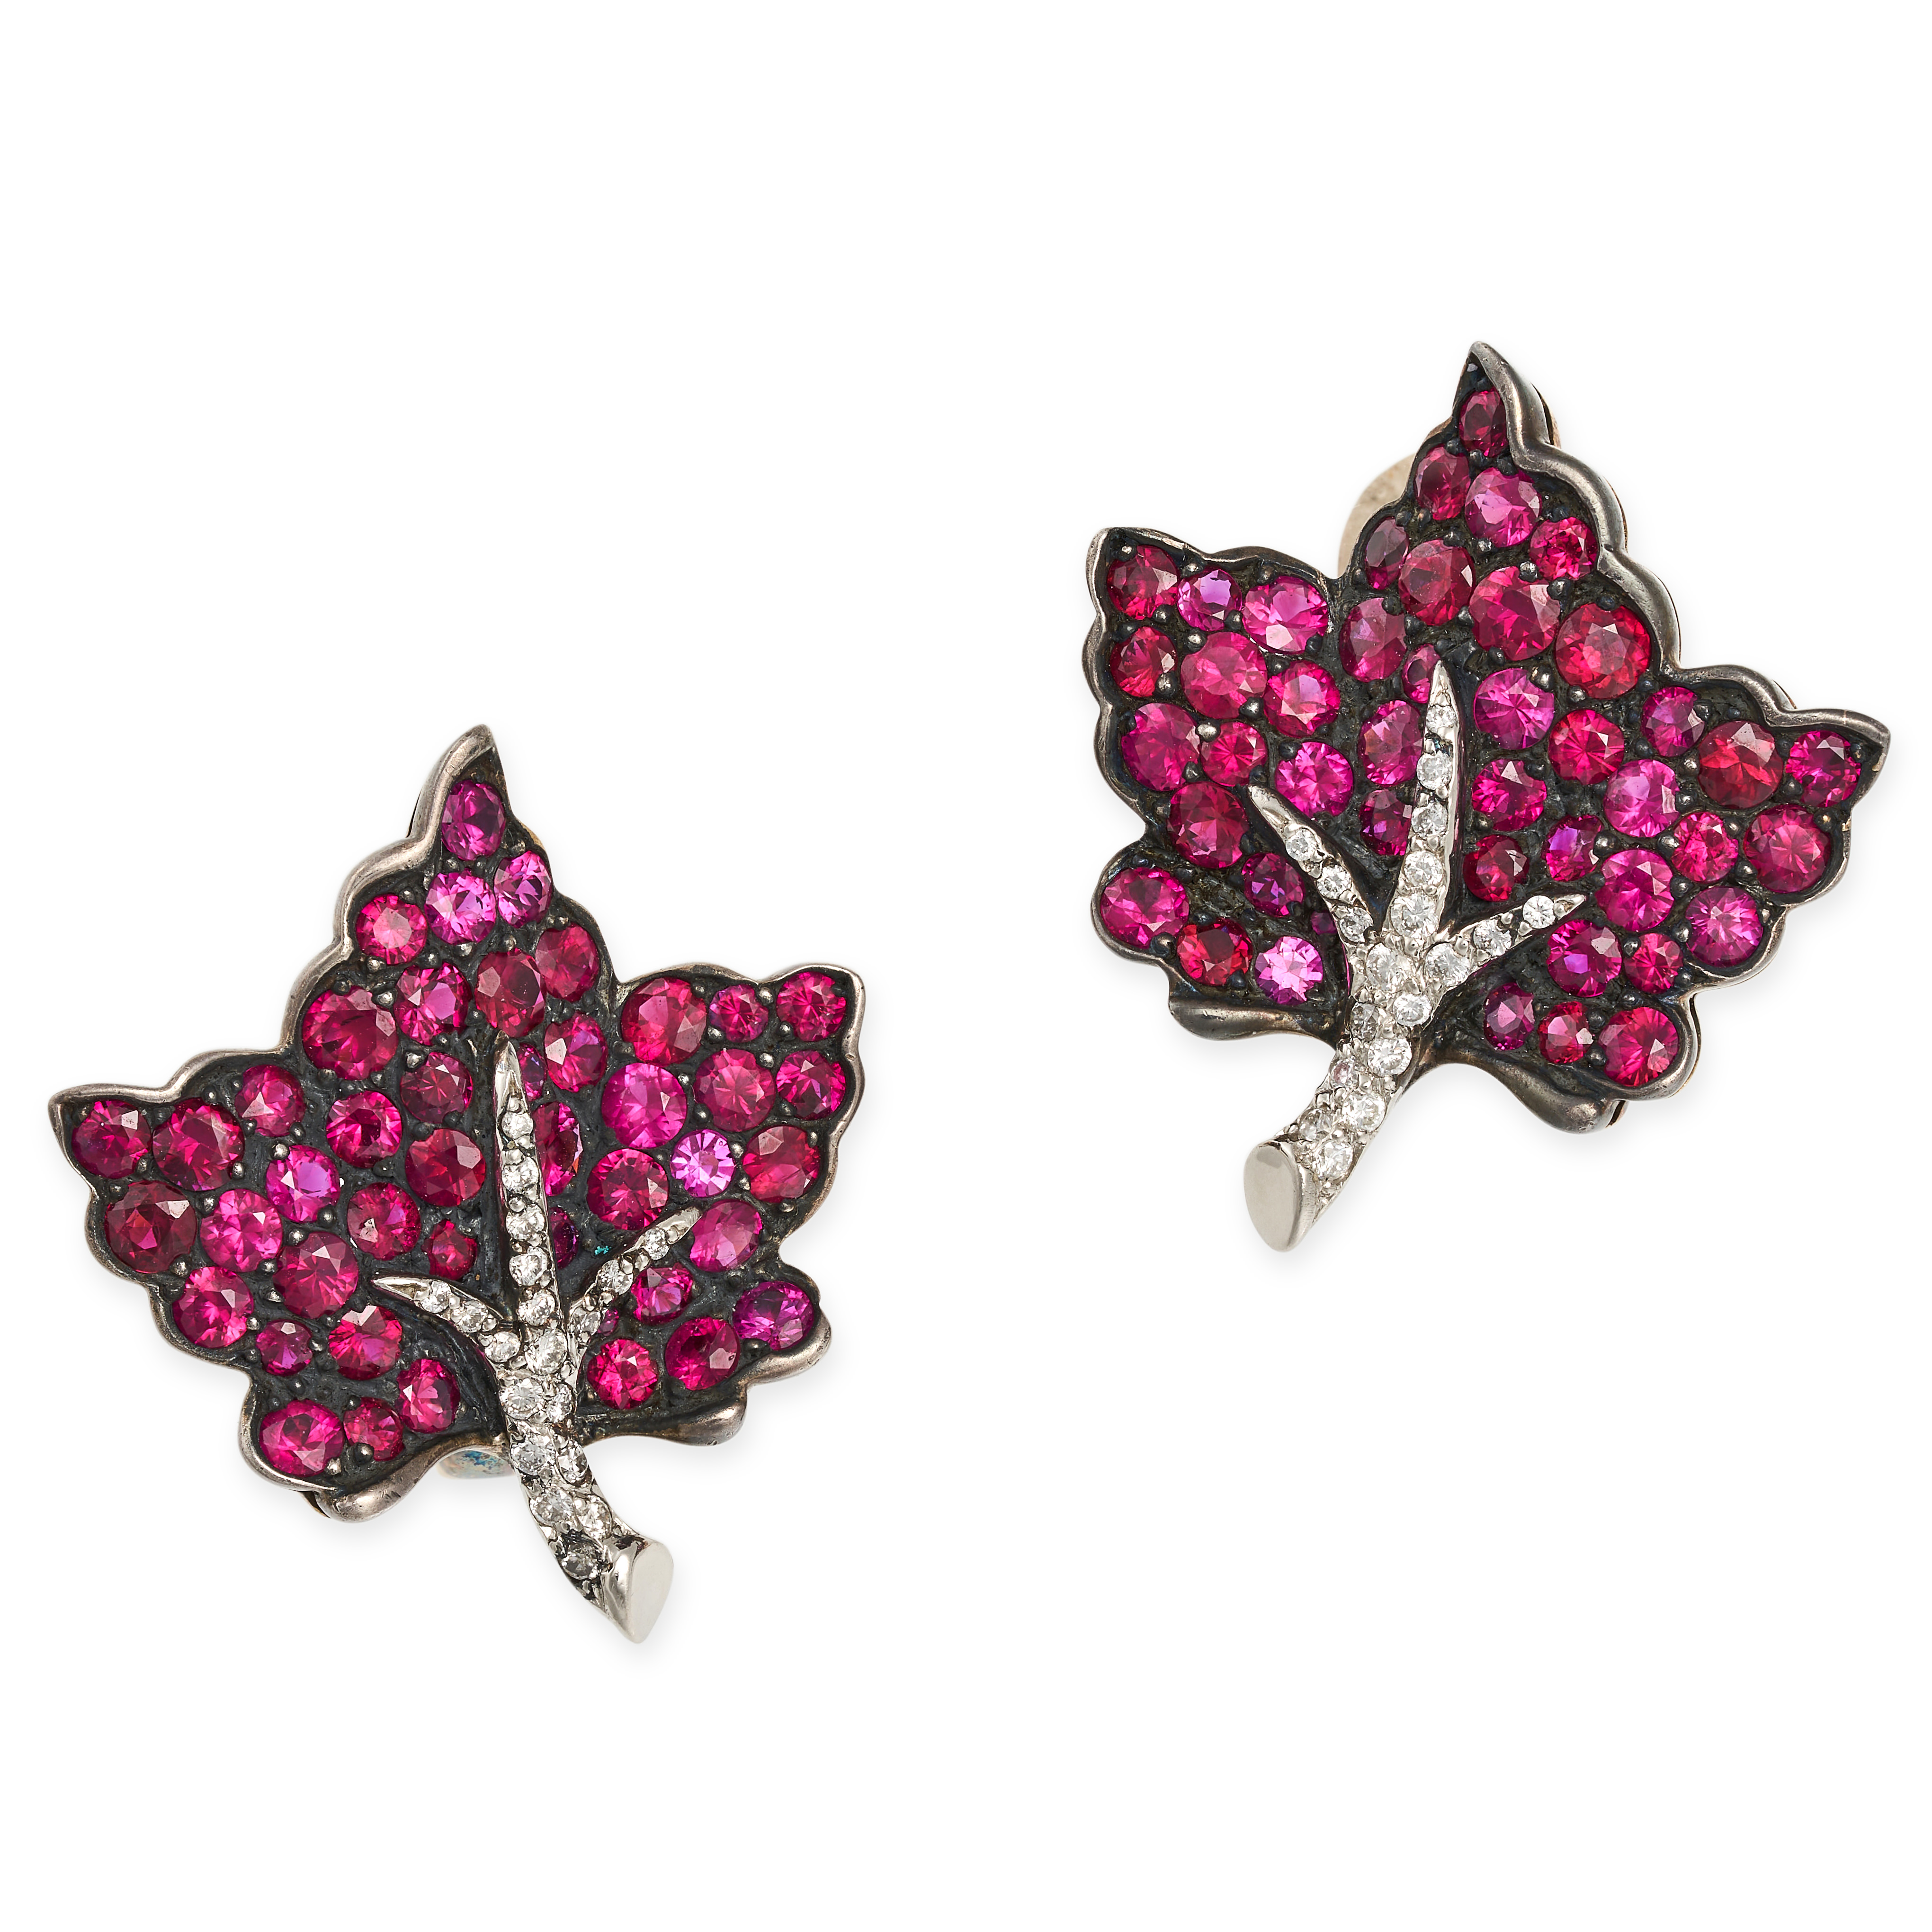 A PAIR OF RUBY AND DIAMOND LEAF EARRINGS in 18ct yellow and blackened gold, each designed as a le...